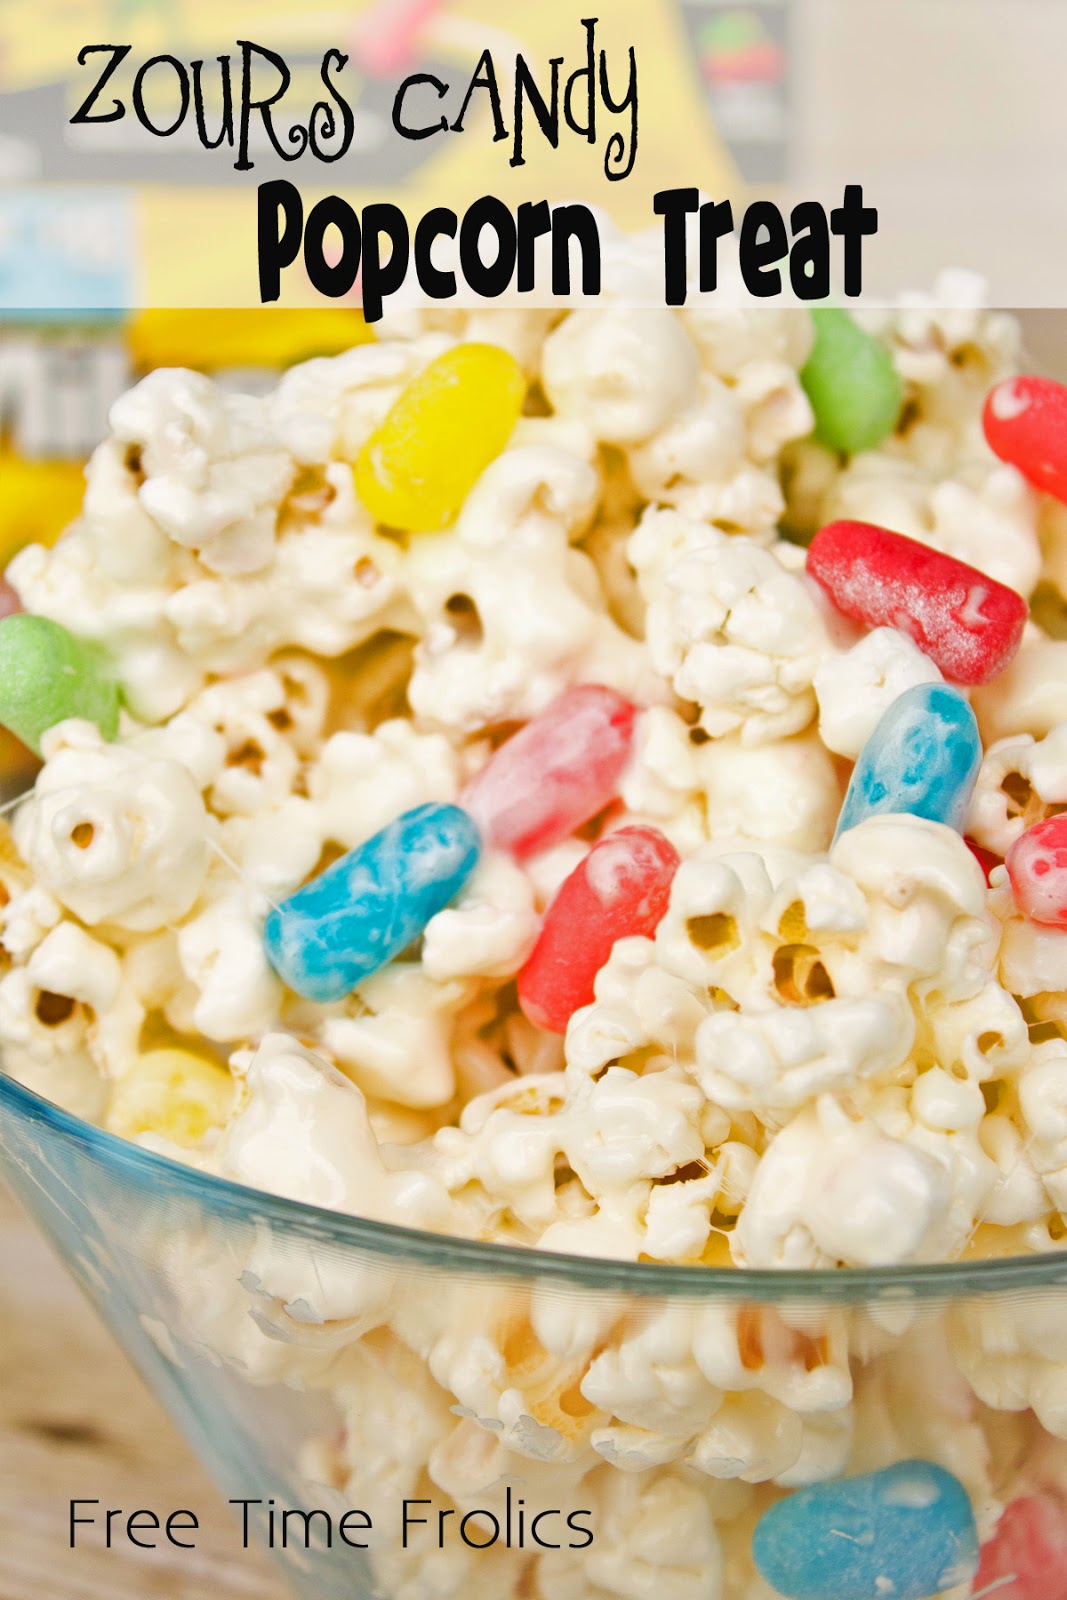 Zours Candy Marshmallow Popcorn Snack - Free Time Frolics